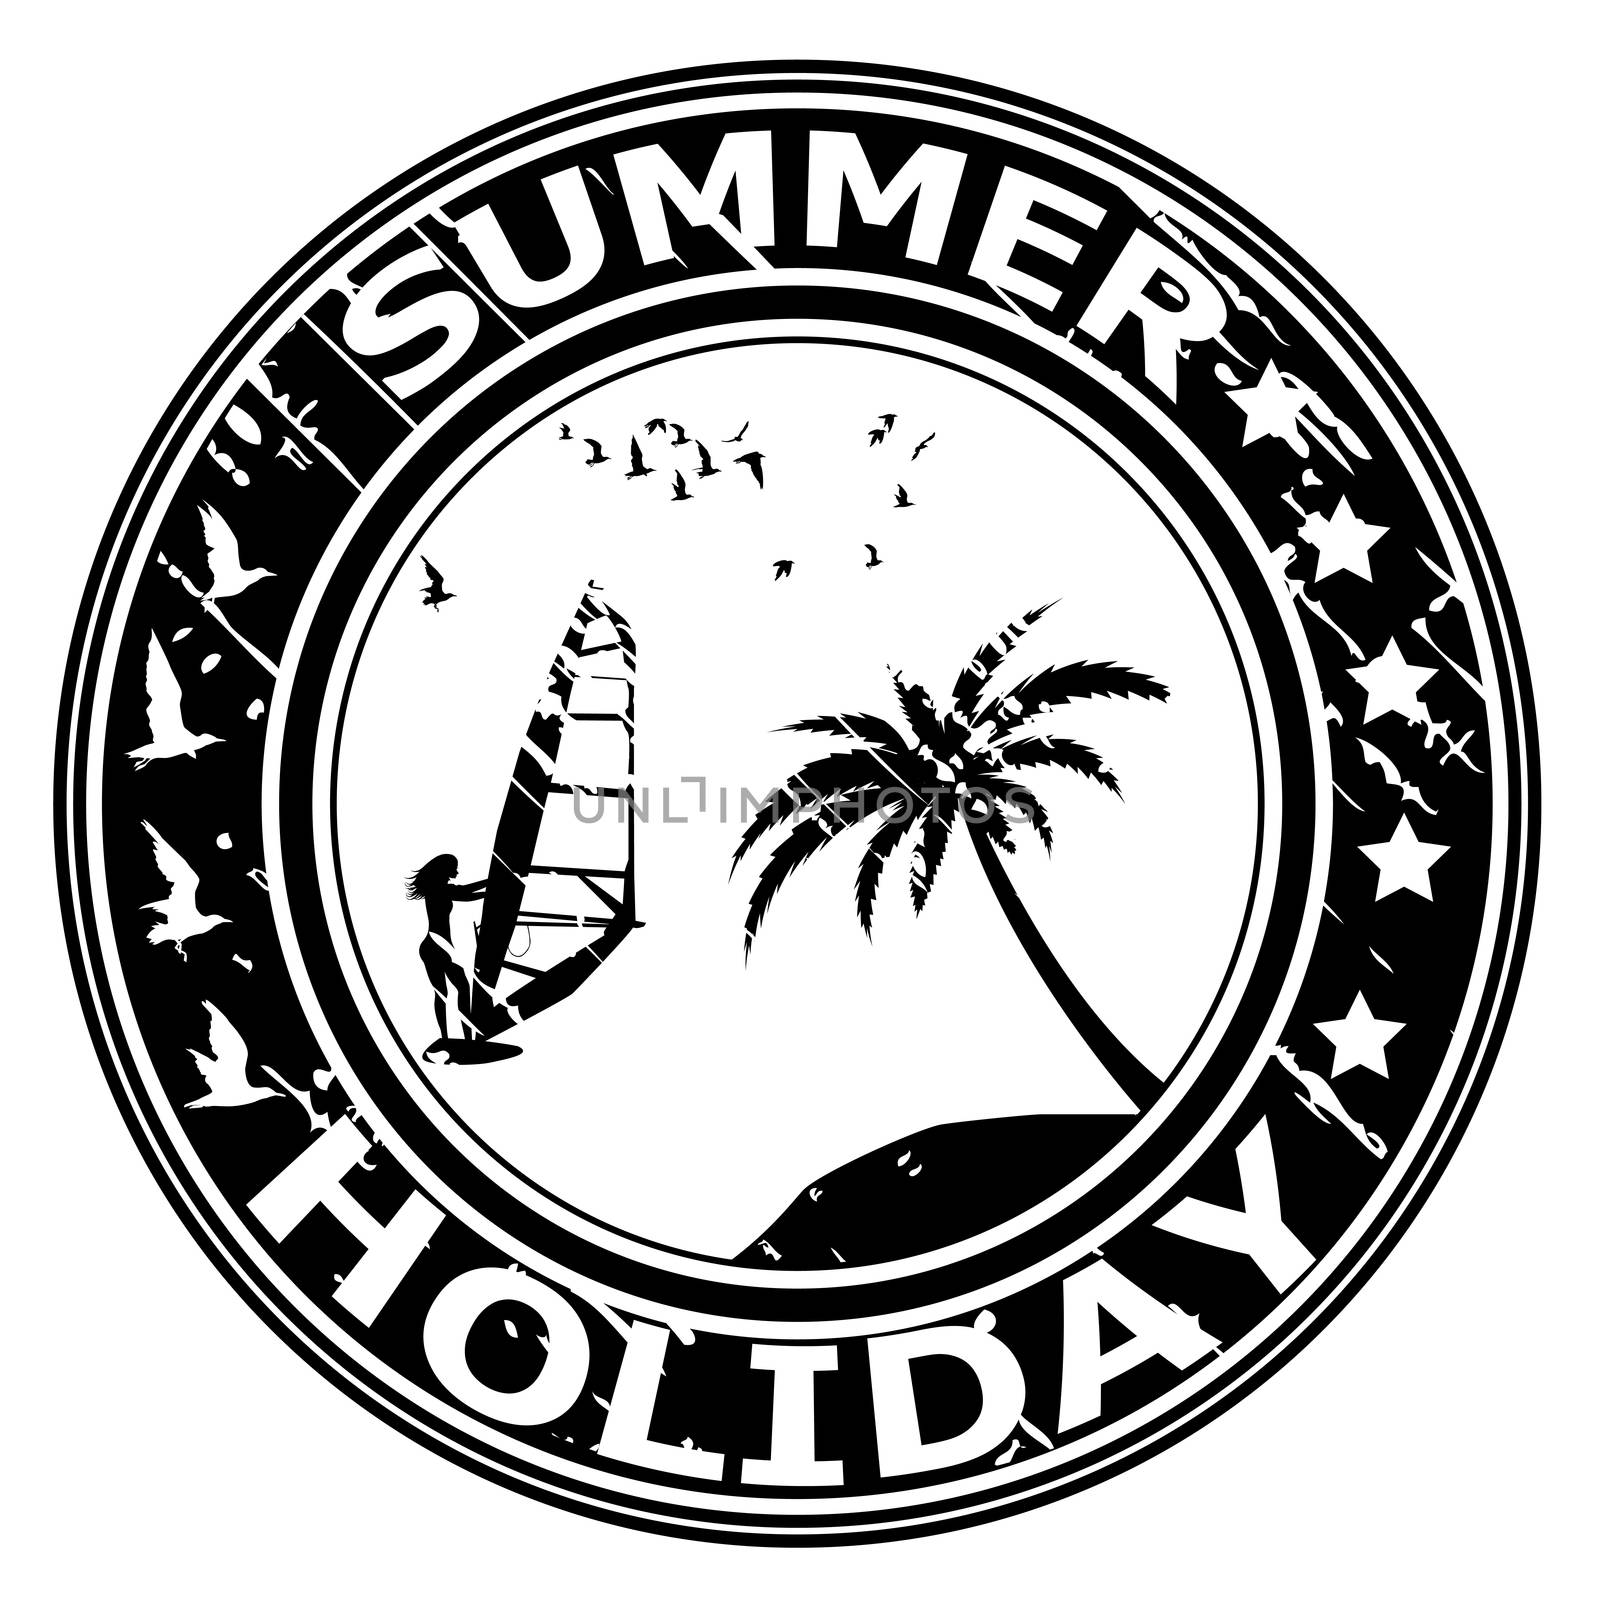 Summer holiday rubber stamp with palm tree and surfer silhouette by hibrida13